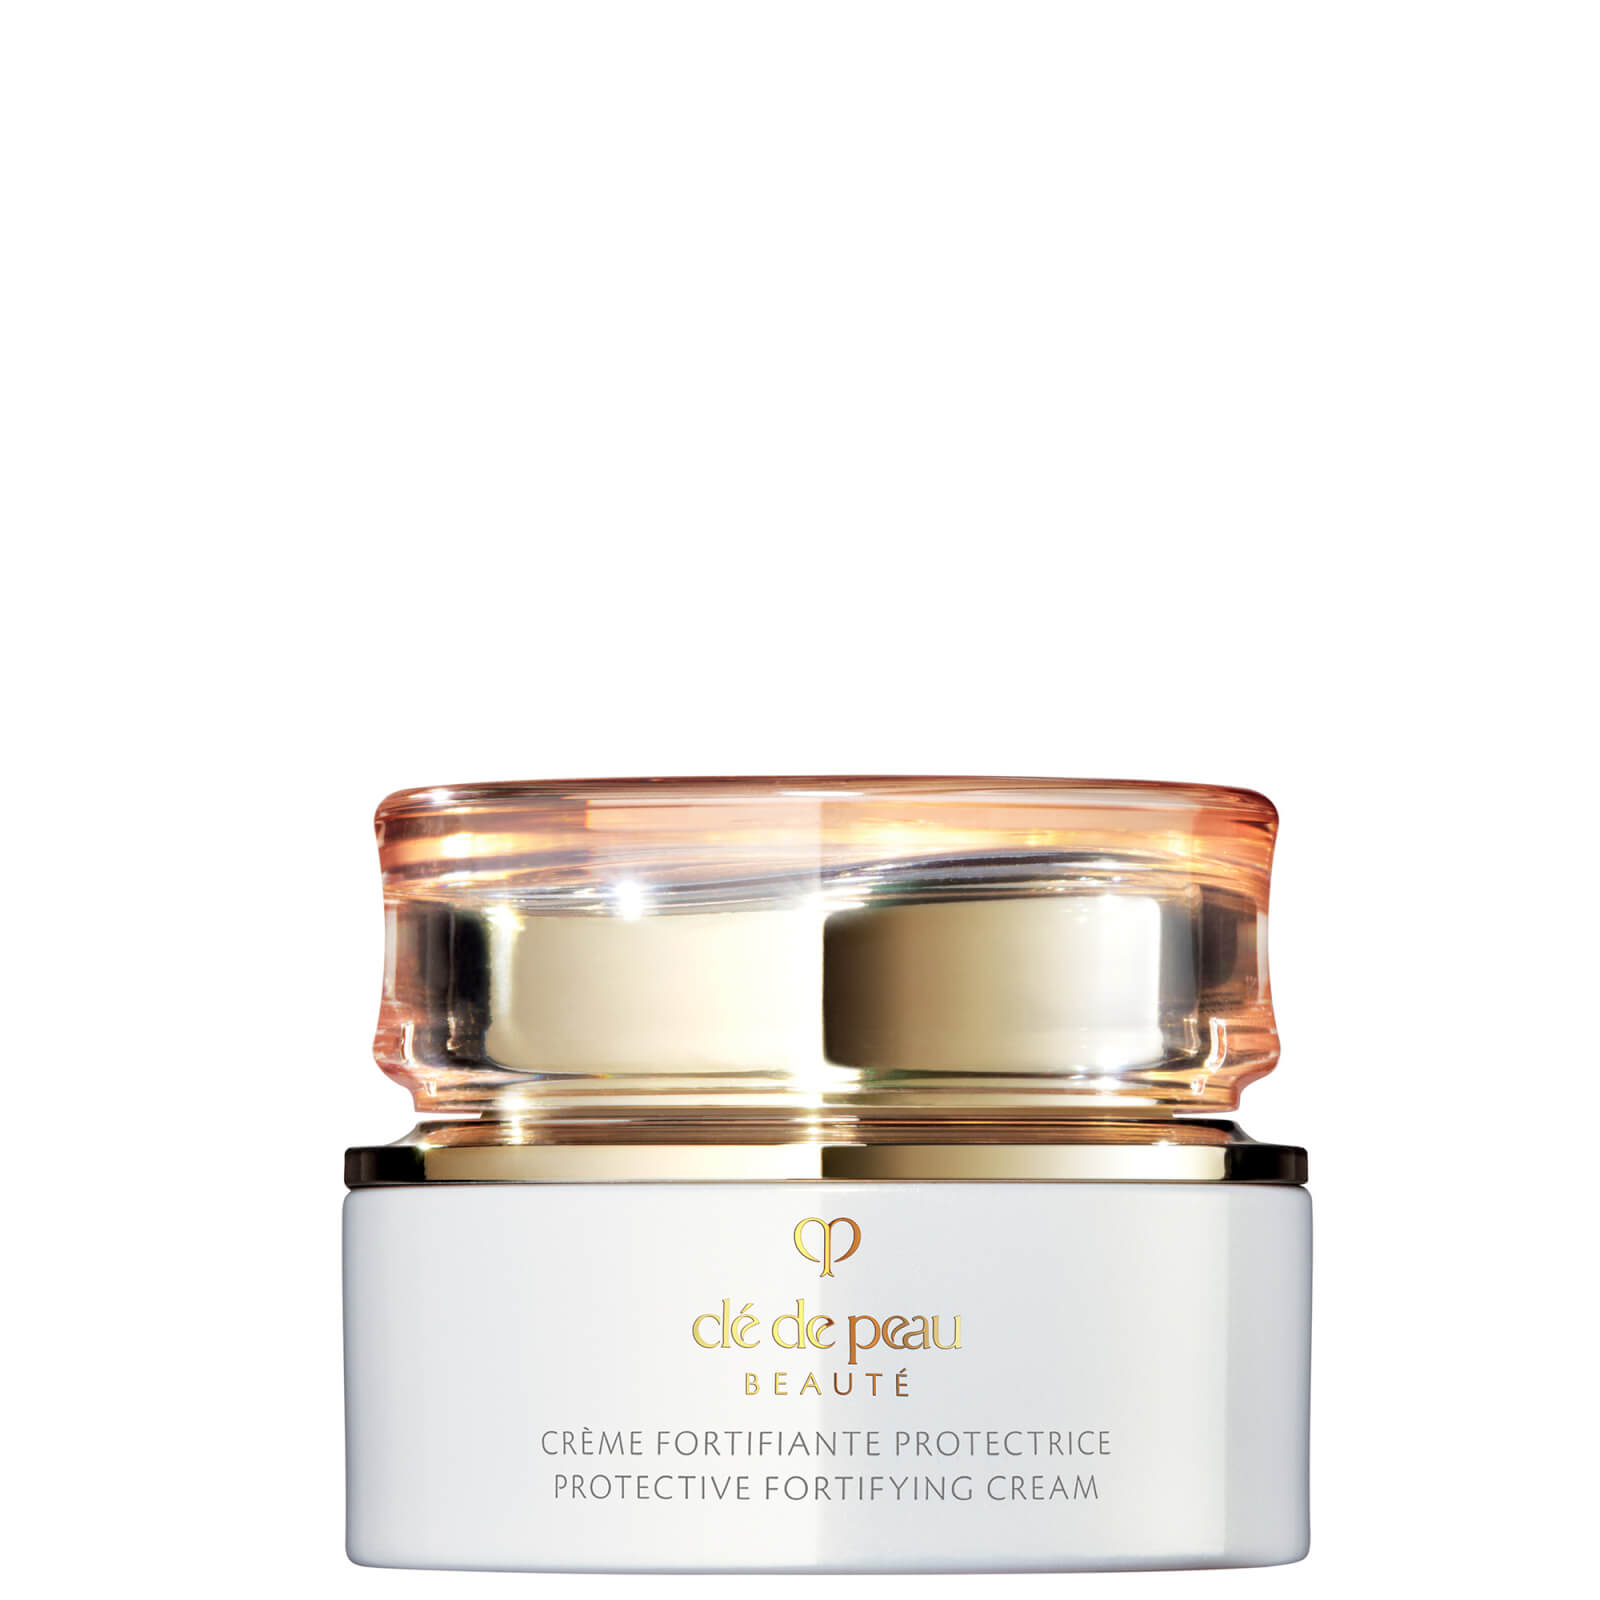 Cle de Peau Beaute Protective Fortifying Cream 50ml